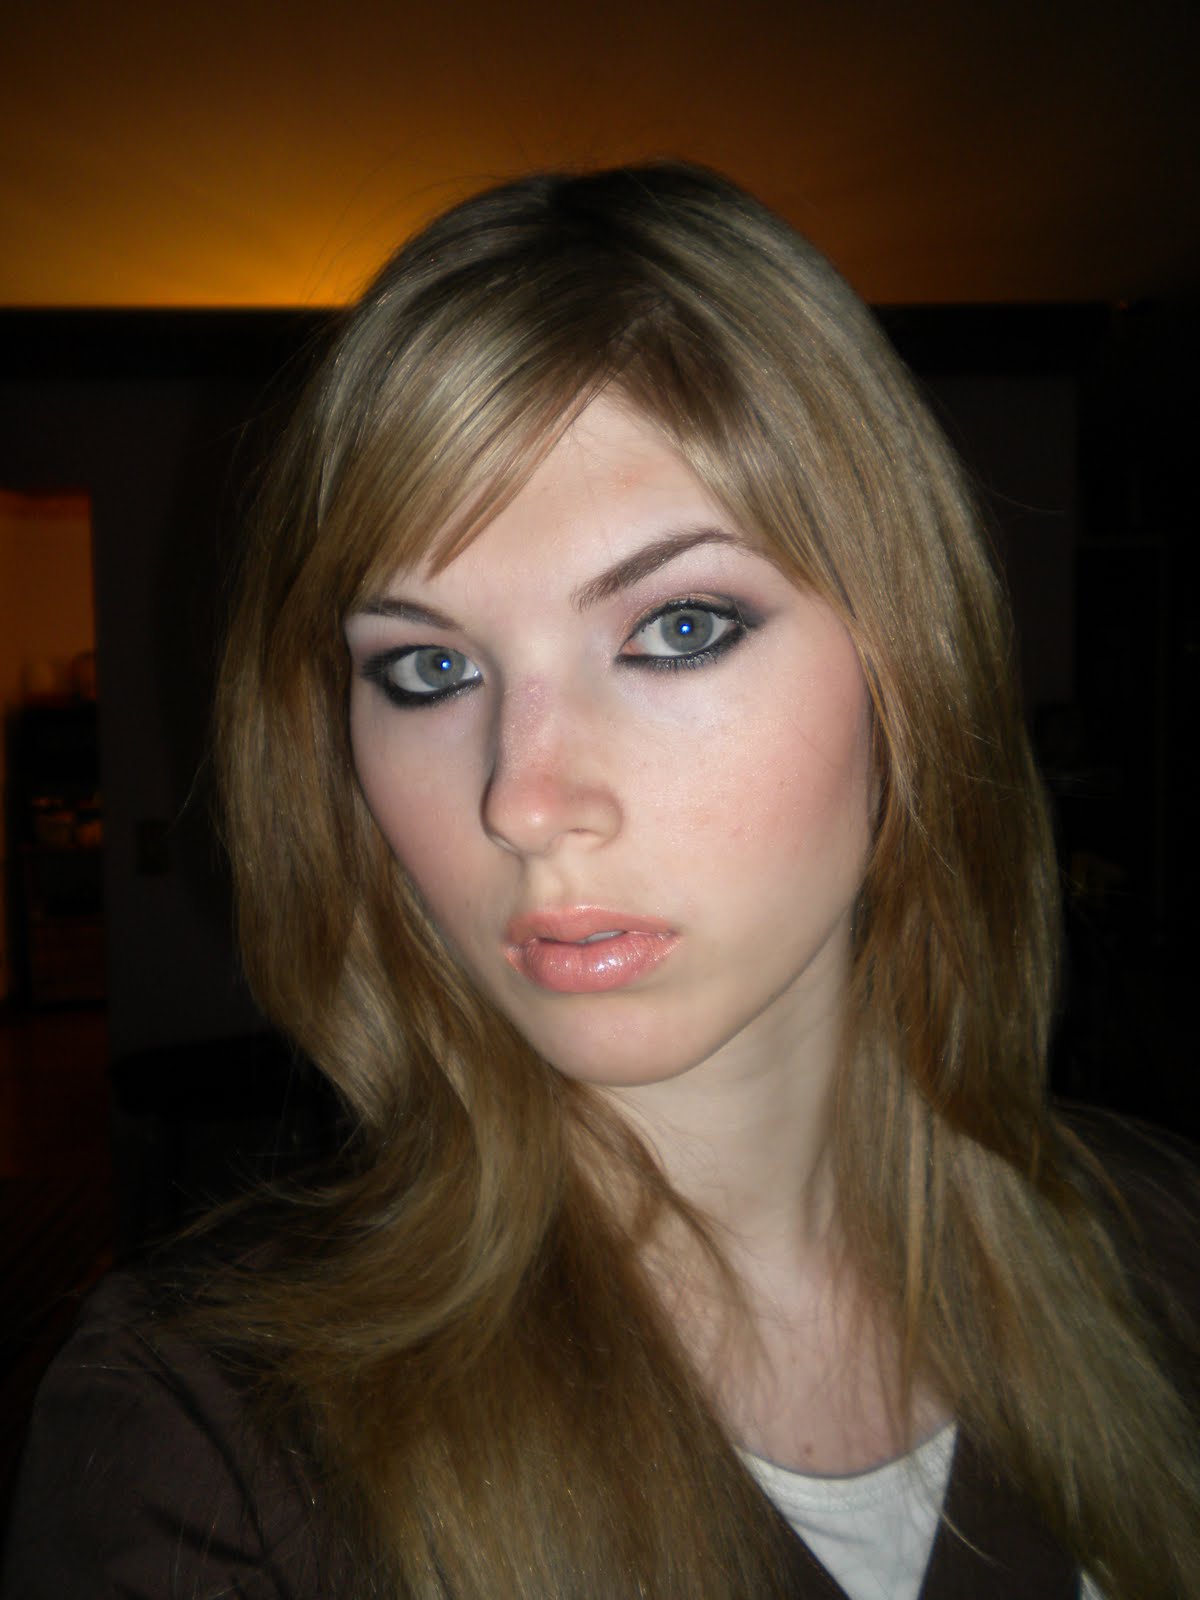 All Day I Dream Of Makeup: June 2011